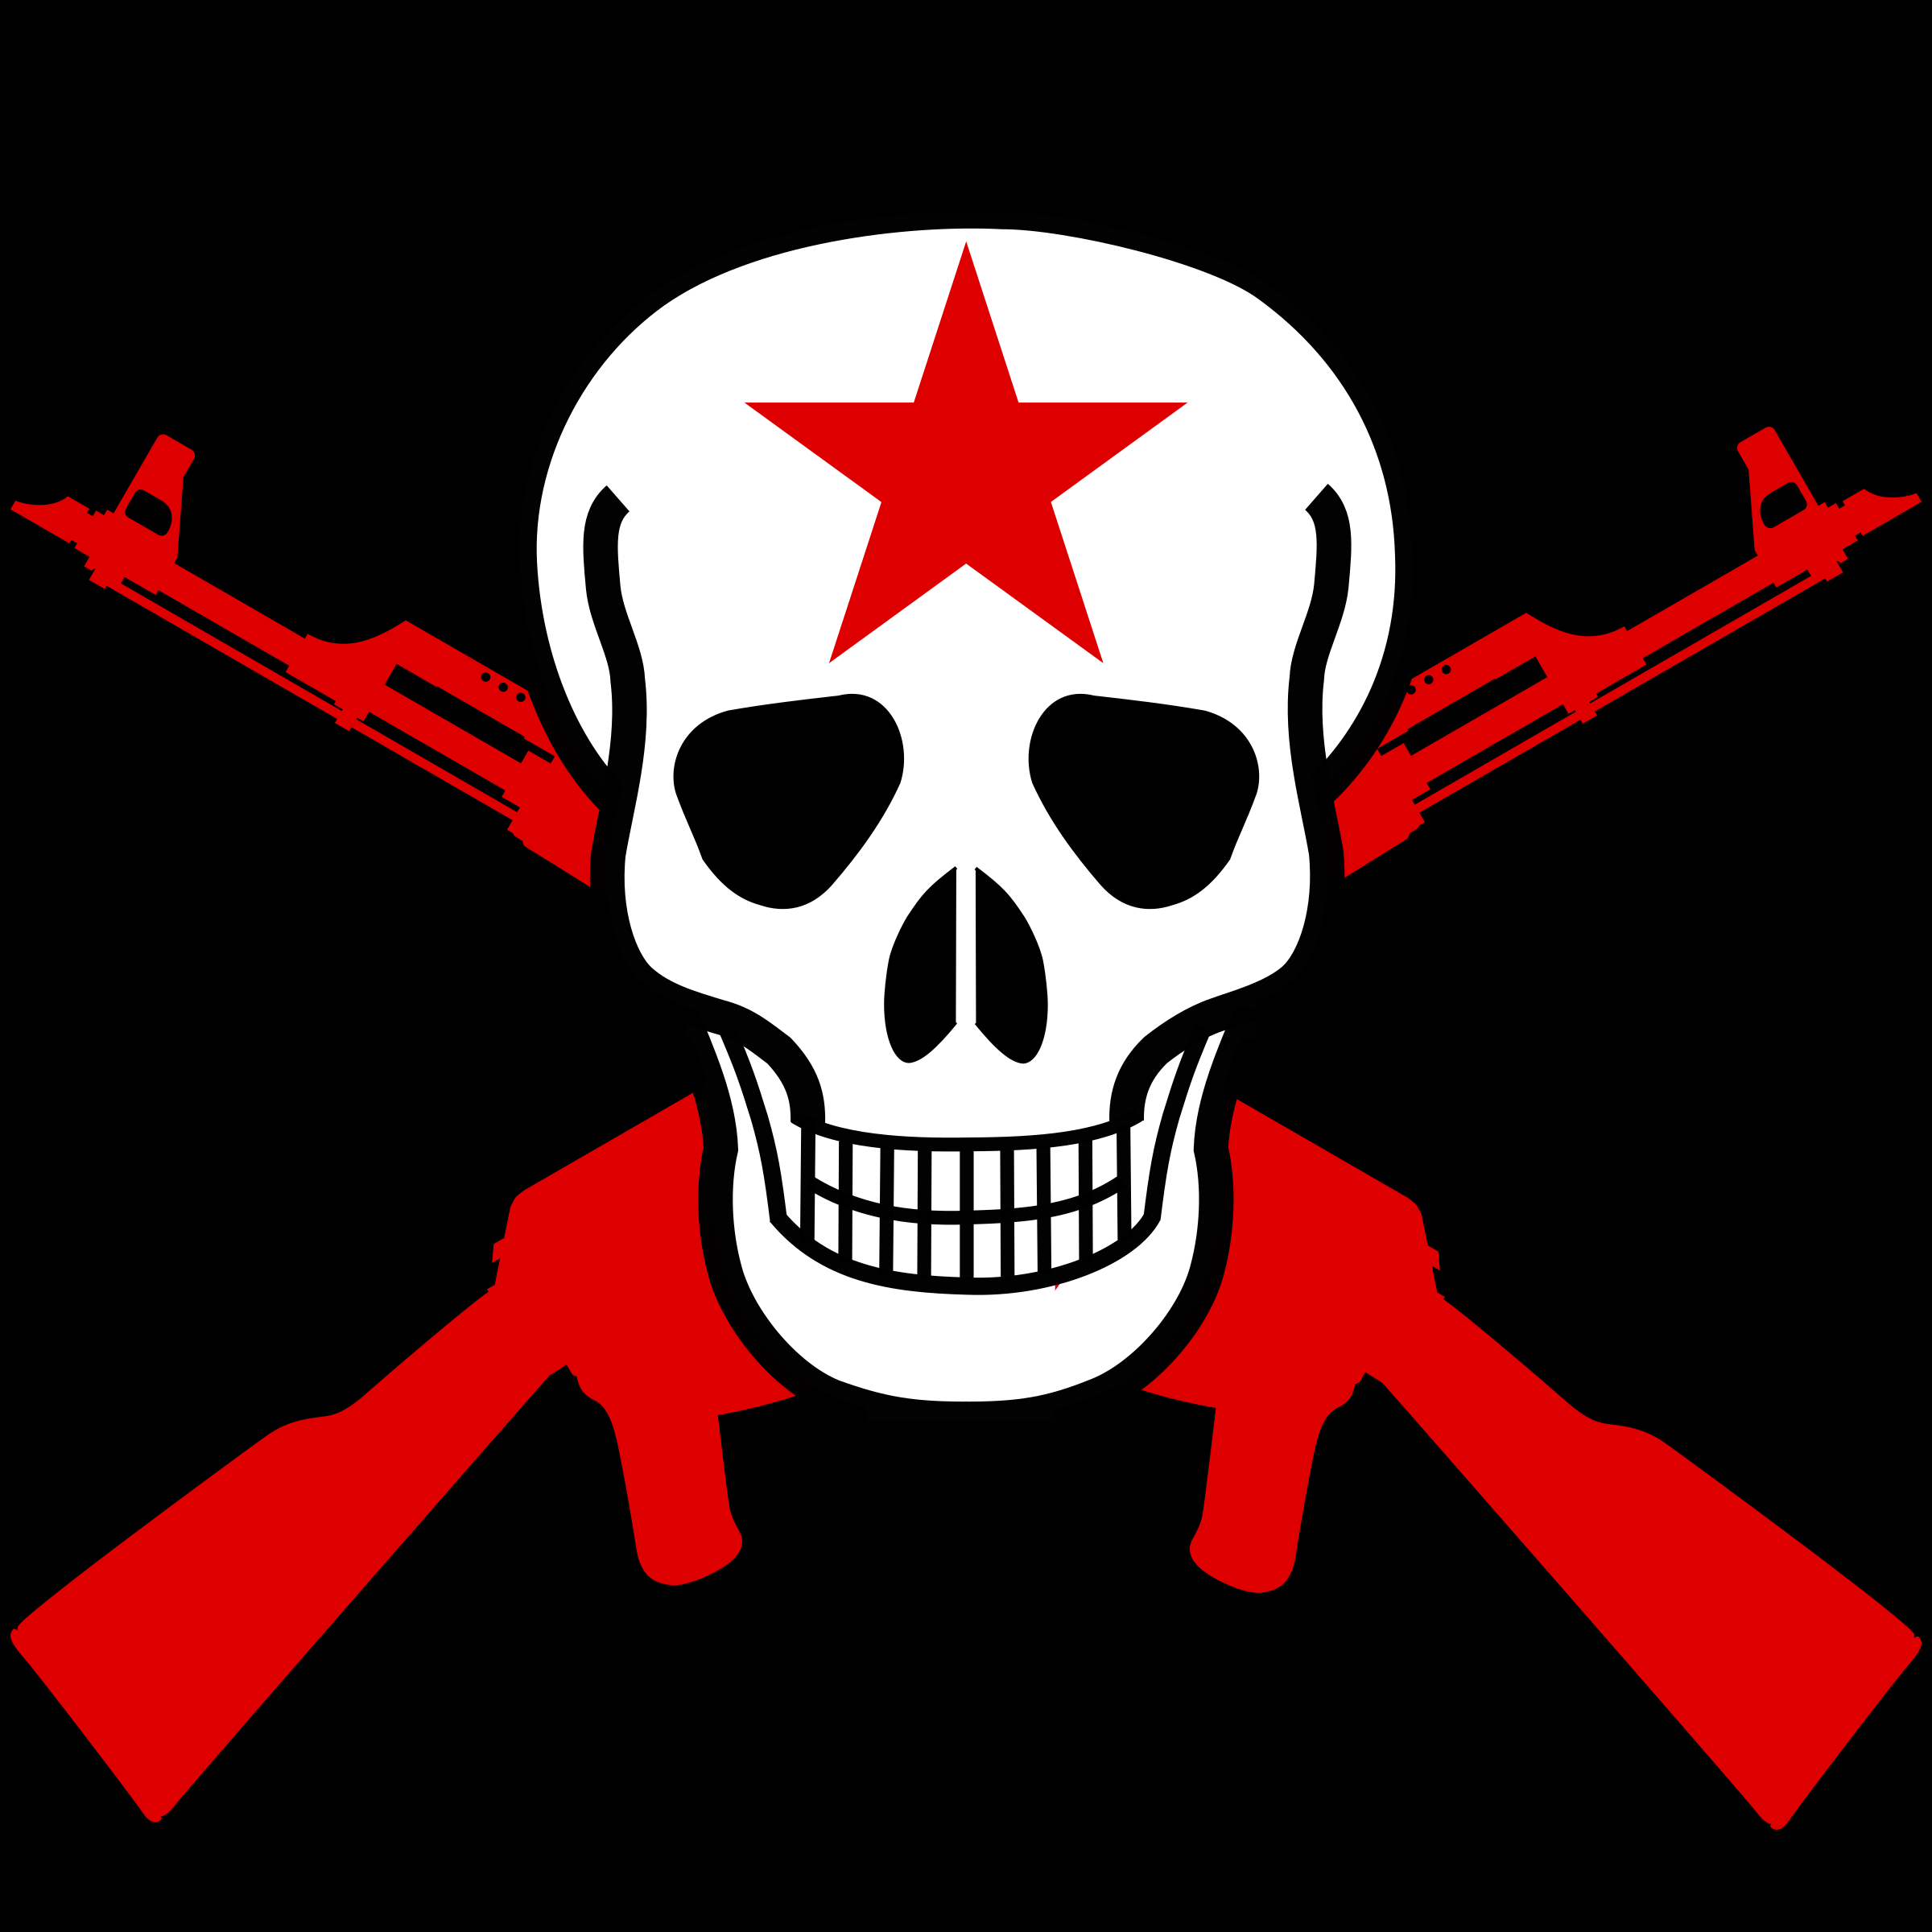 Download Clipart - Skull and crossed guns